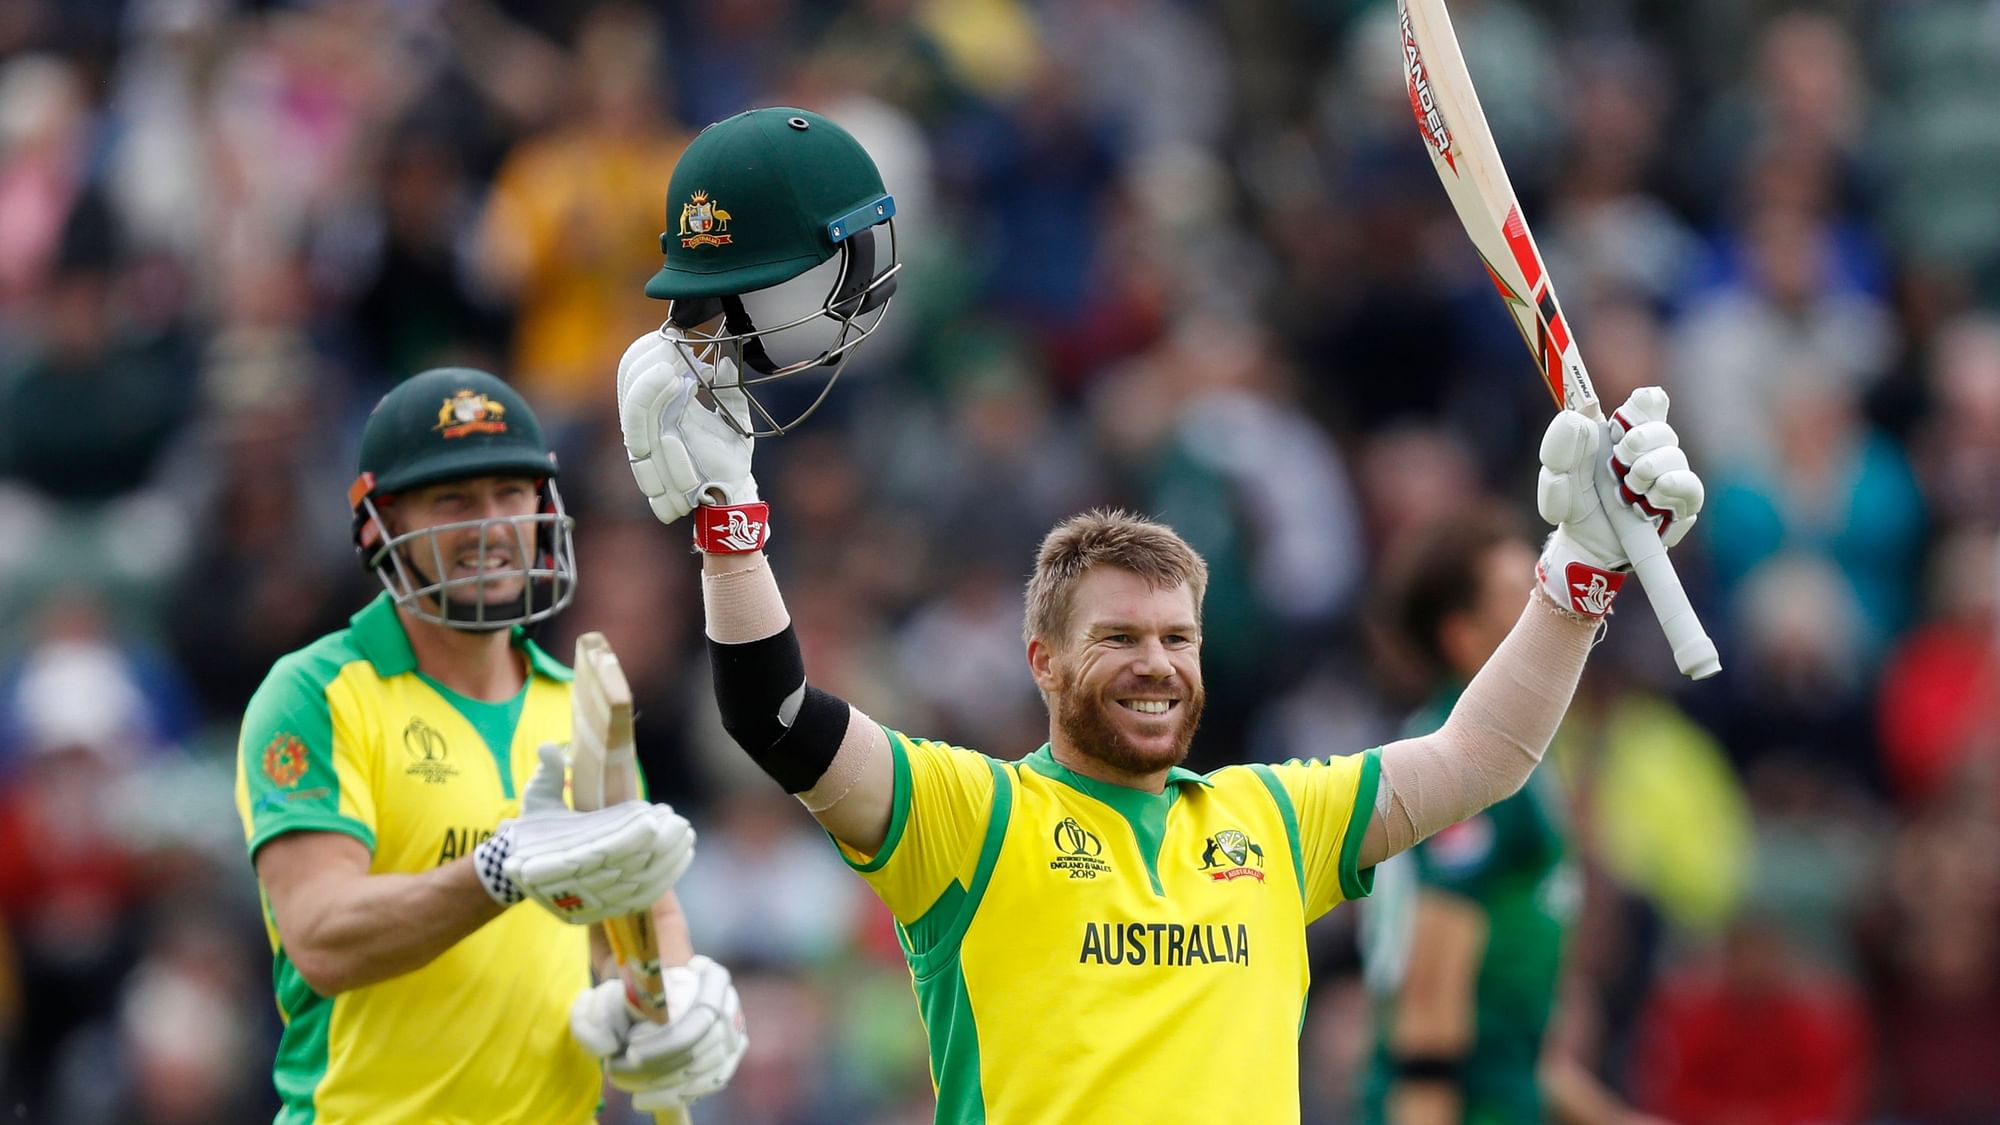 David Warner wasn’t exactly back to his best, but he still reached triple figures from 102 balls.